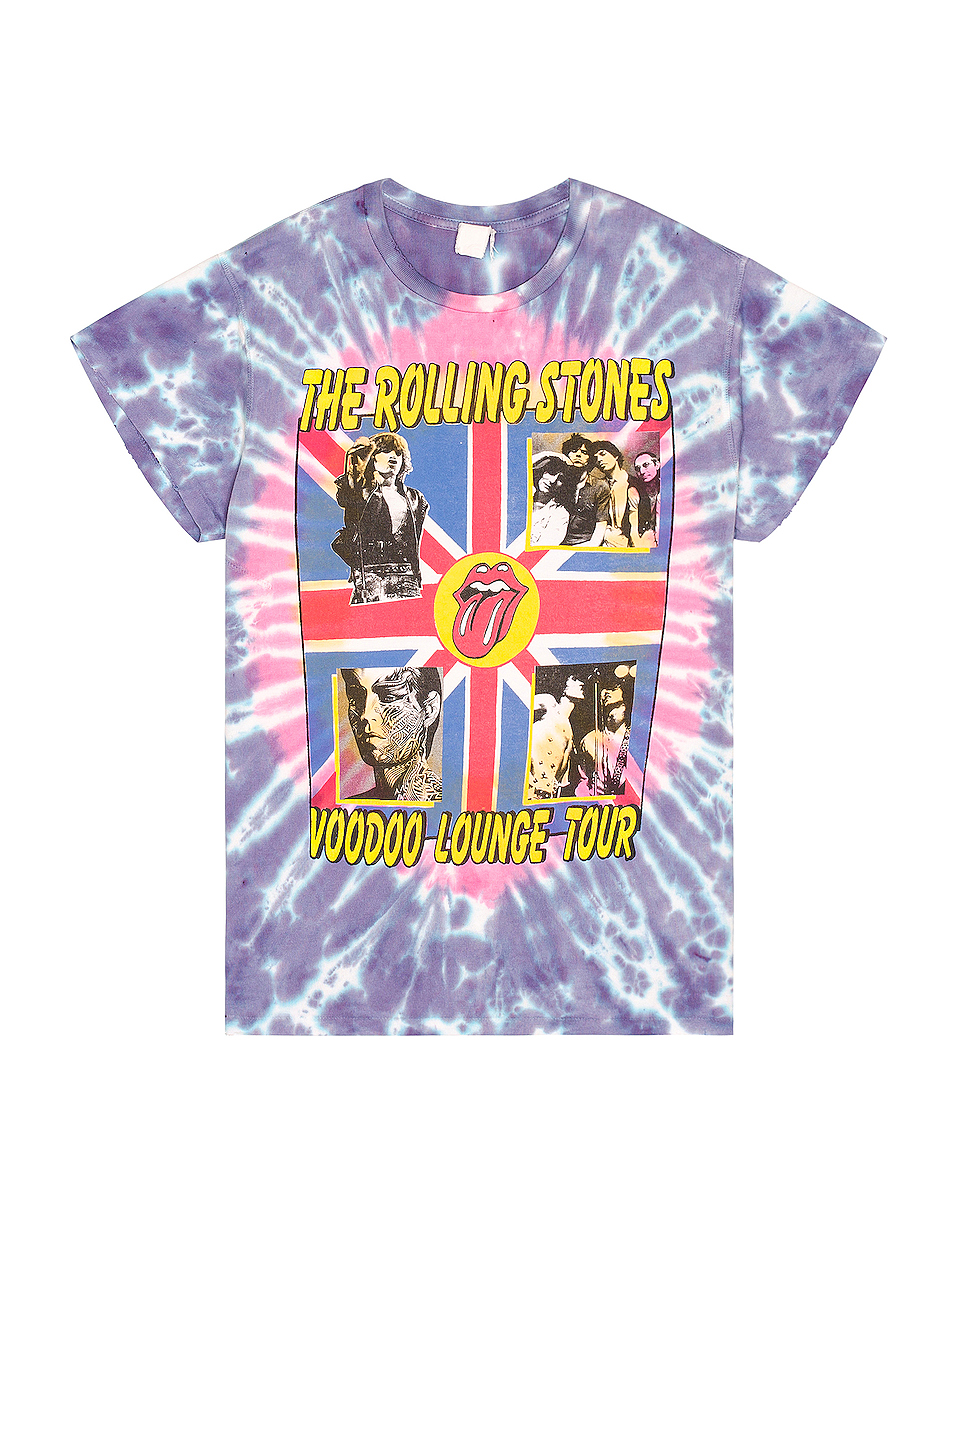 THe Rolling Stones 1989 T-Shirt展示图